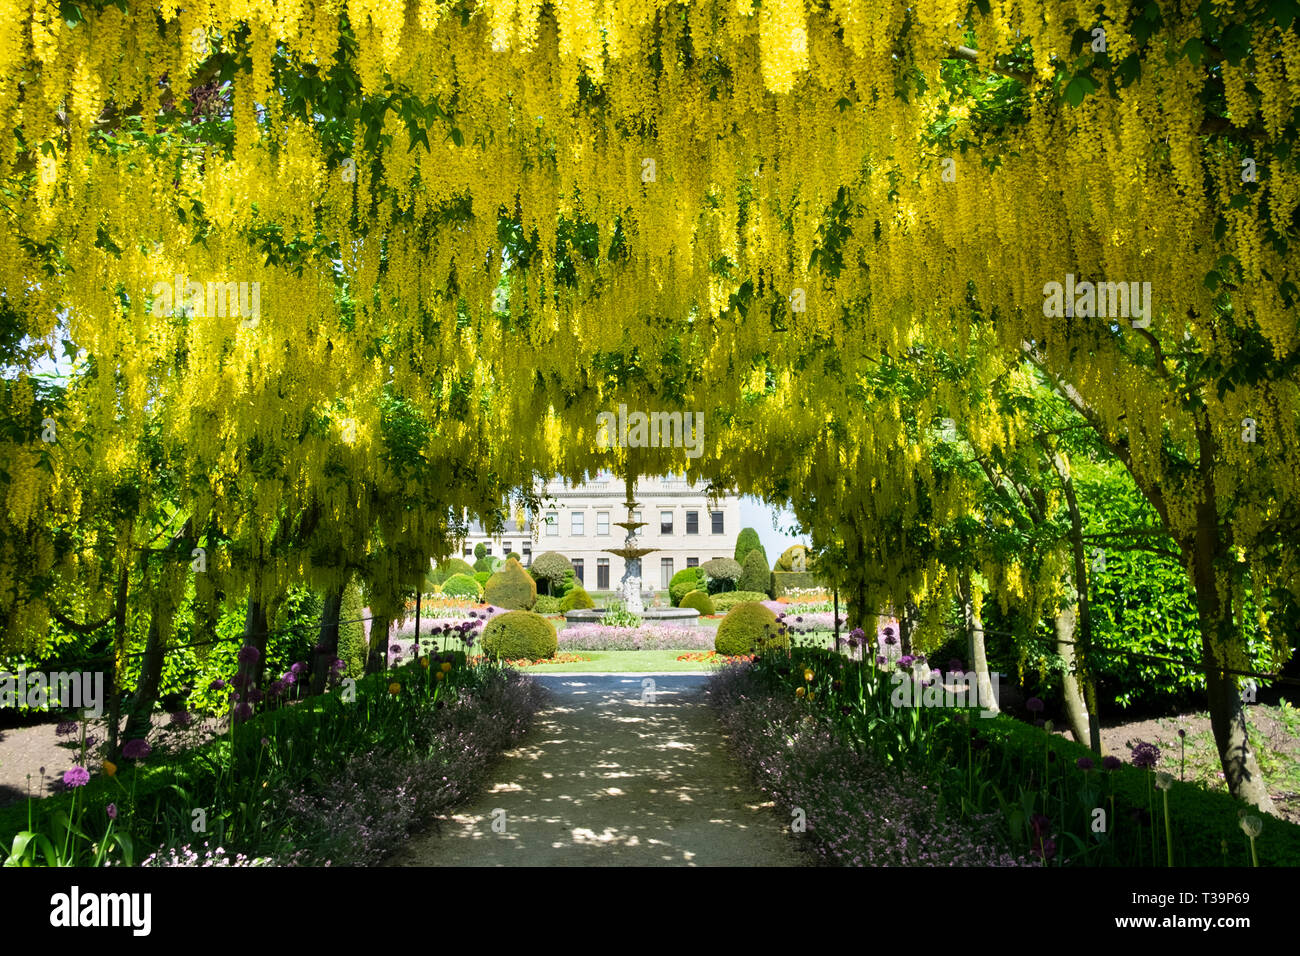 Laburnum arch, at Brodsworth Hall near Doncaster, Yorkshire, UK. A spectacular walkway under flowering laburnum trees in may. Stock Photo